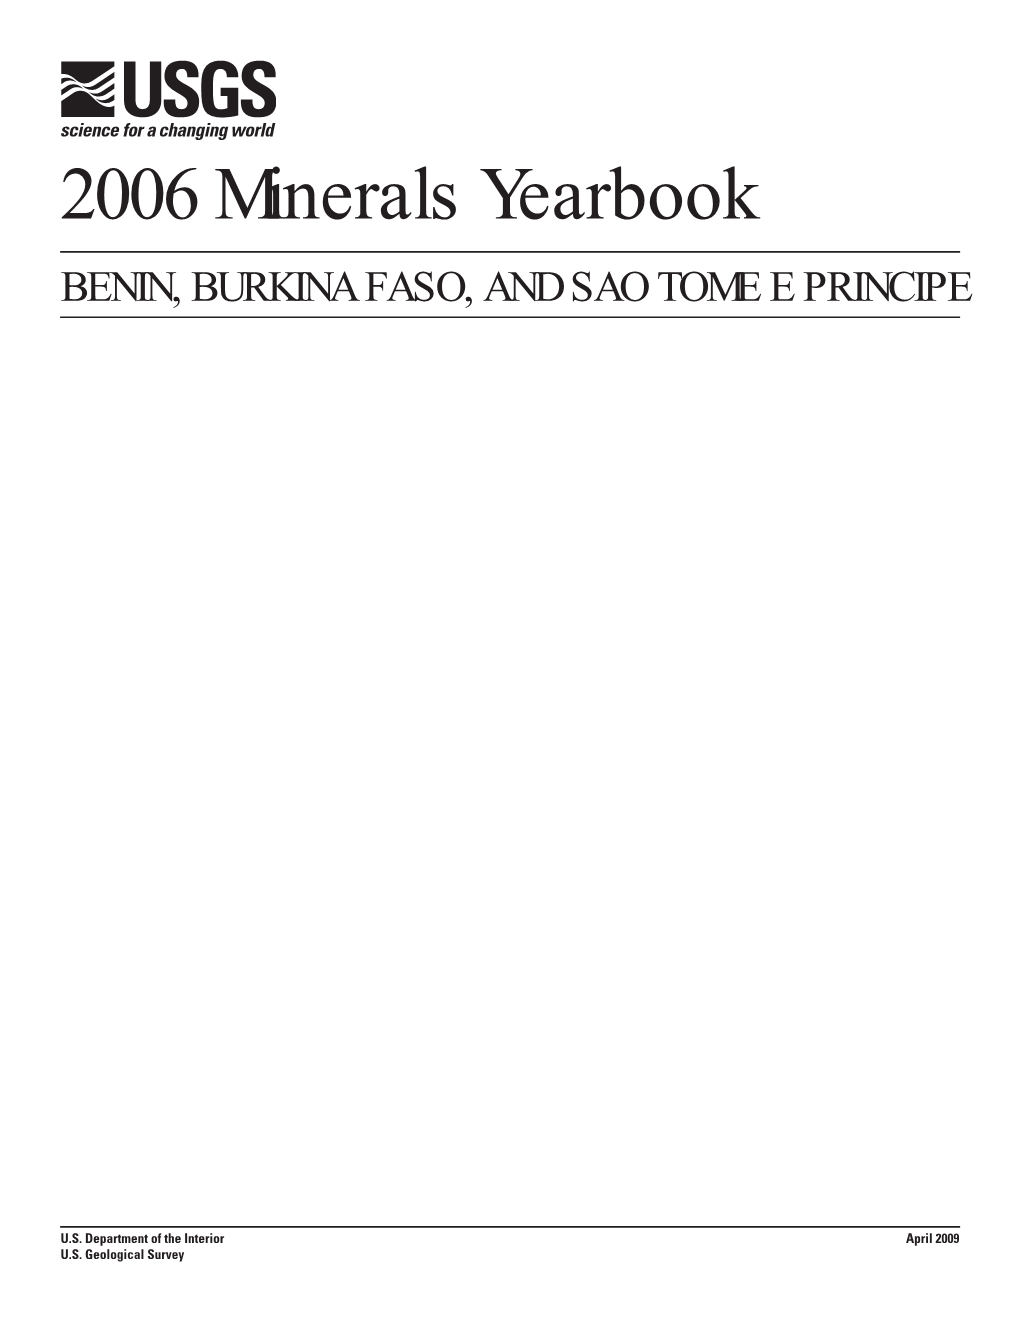 The Mineral Industries of Benin, Burkina Faso, and Sao Tome E